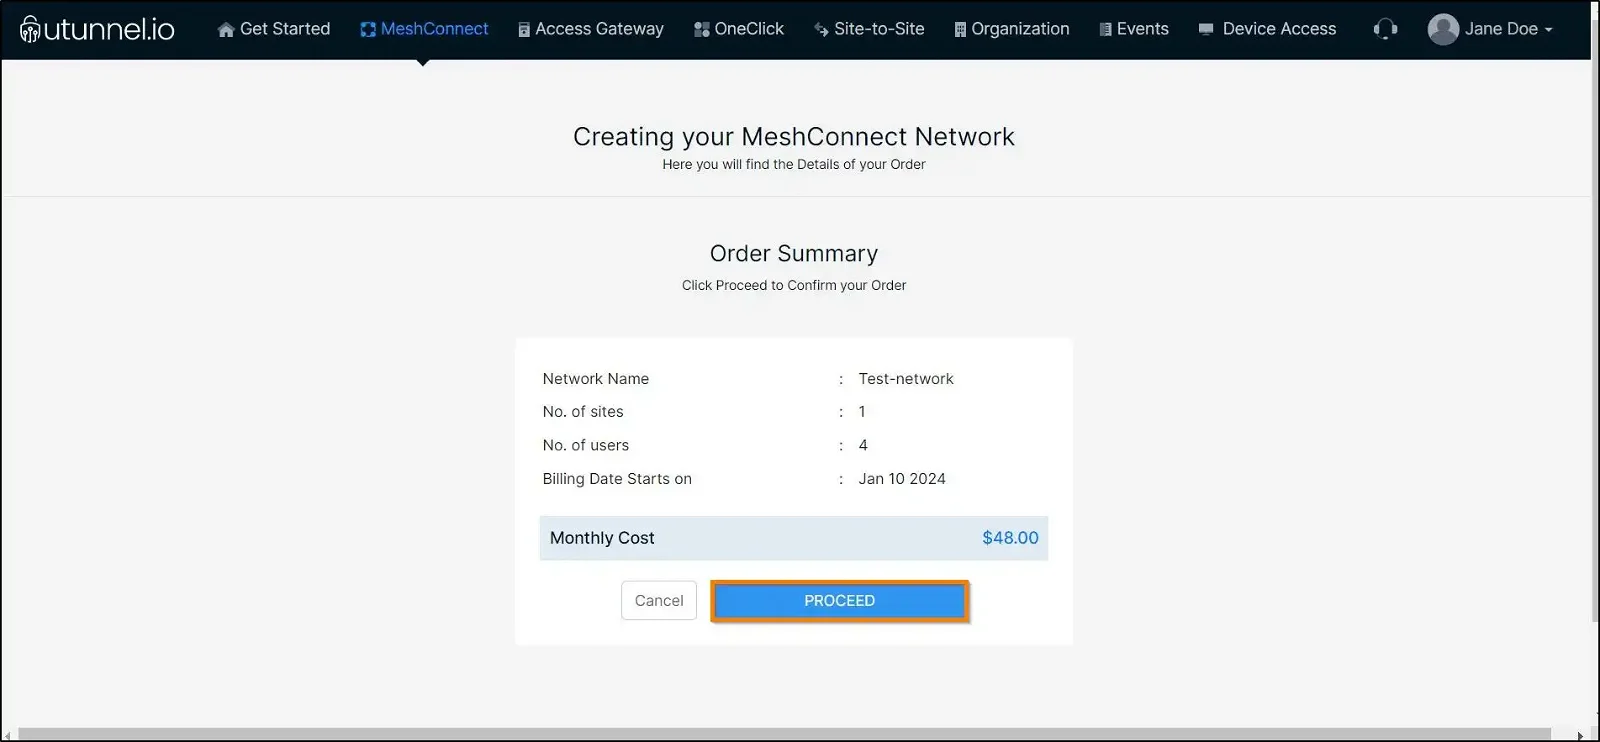 How to configure a MeshConnect network overview page